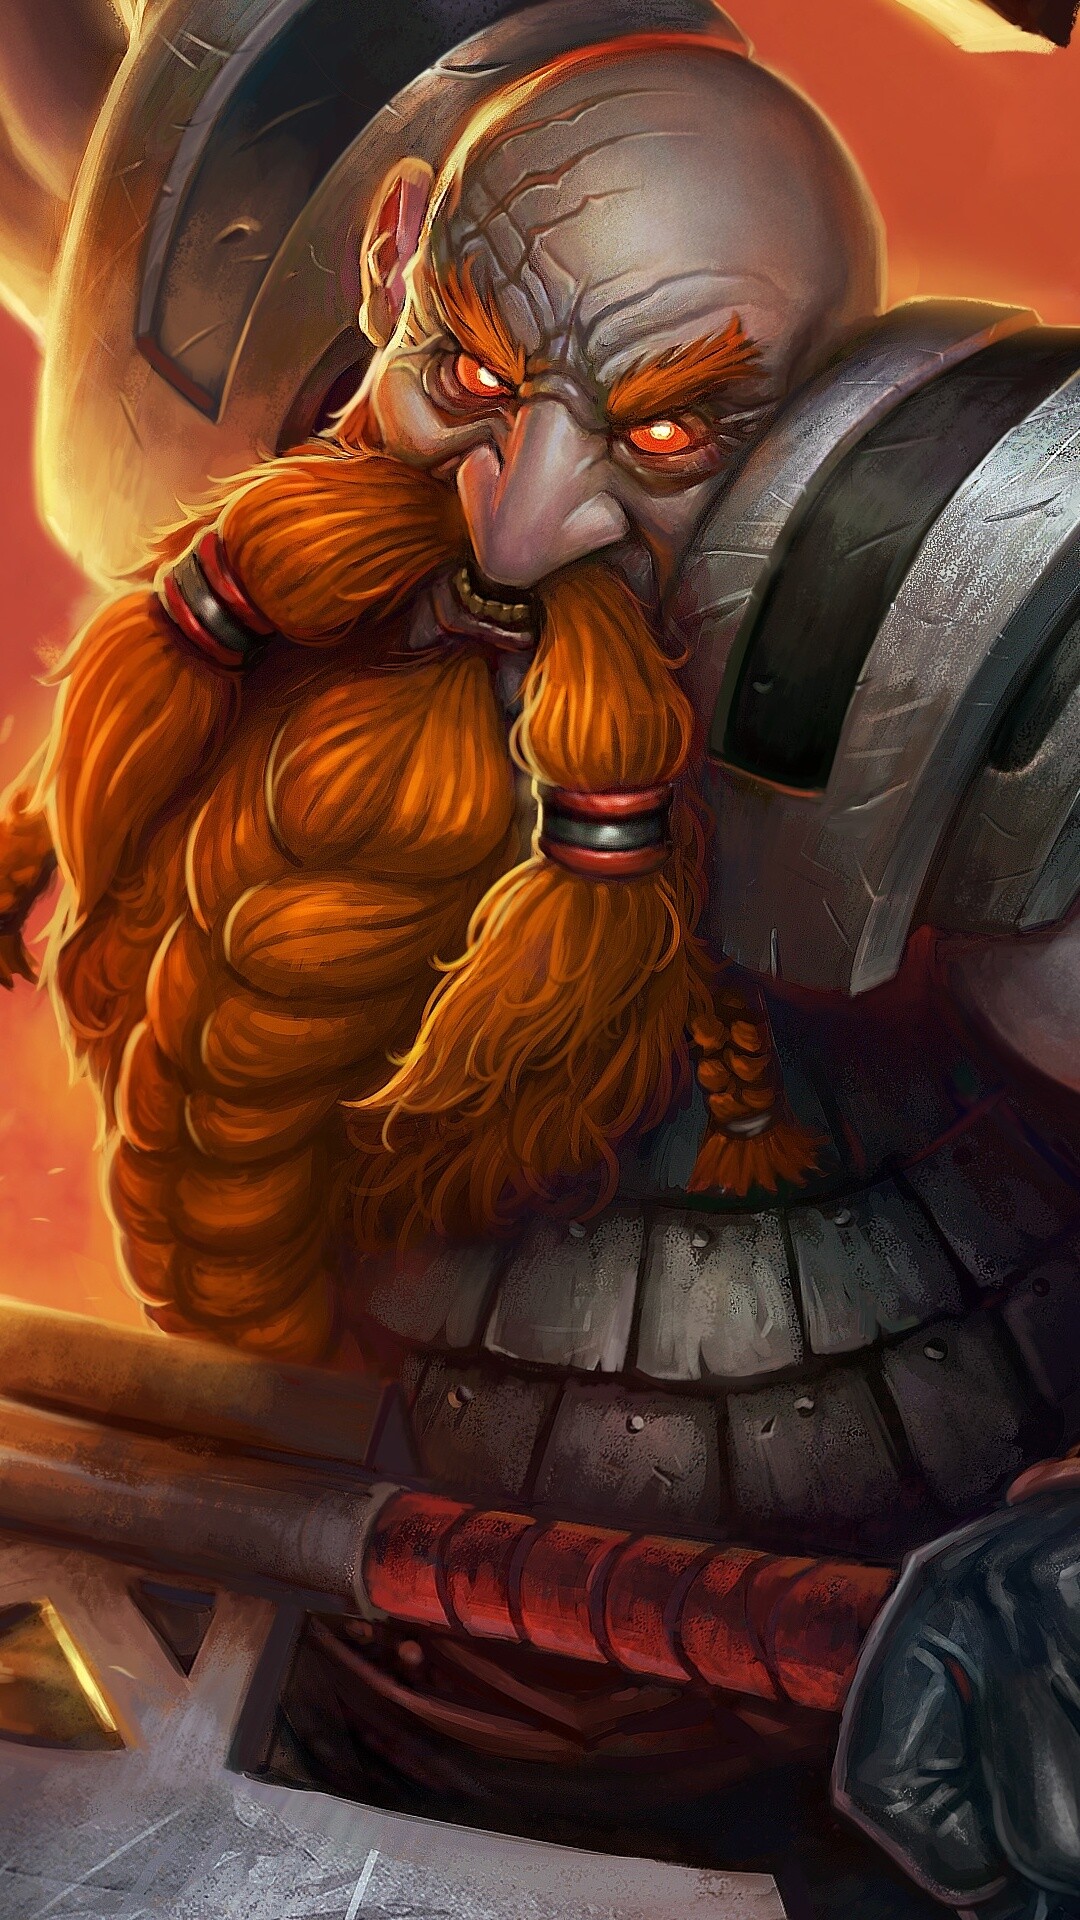 Dwarf: Small humanlike creatures, often endowed with magical powers. 1080x1920 Full HD Wallpaper.